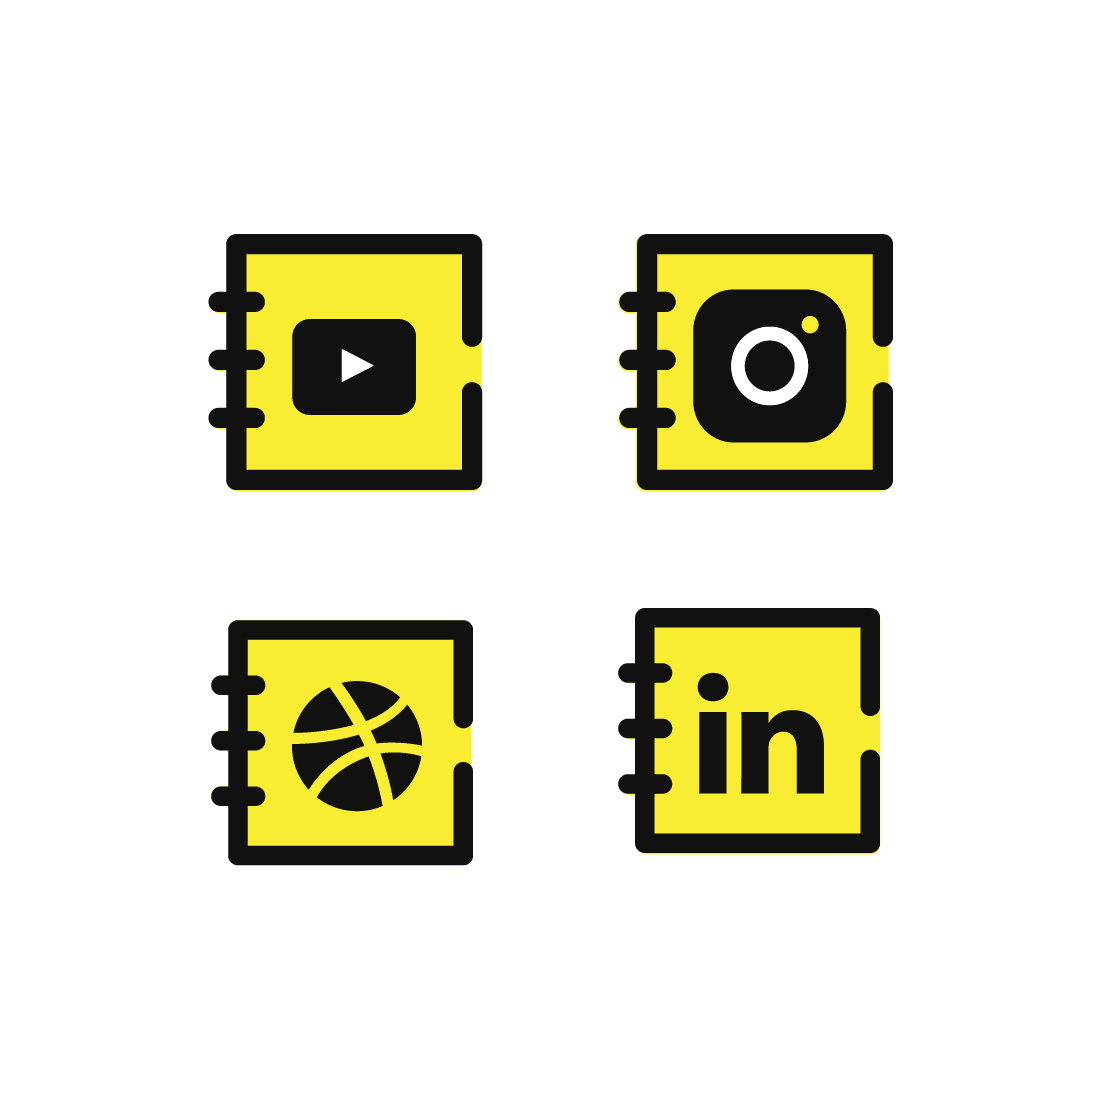 Yellow and black icon of a camera and a video player.